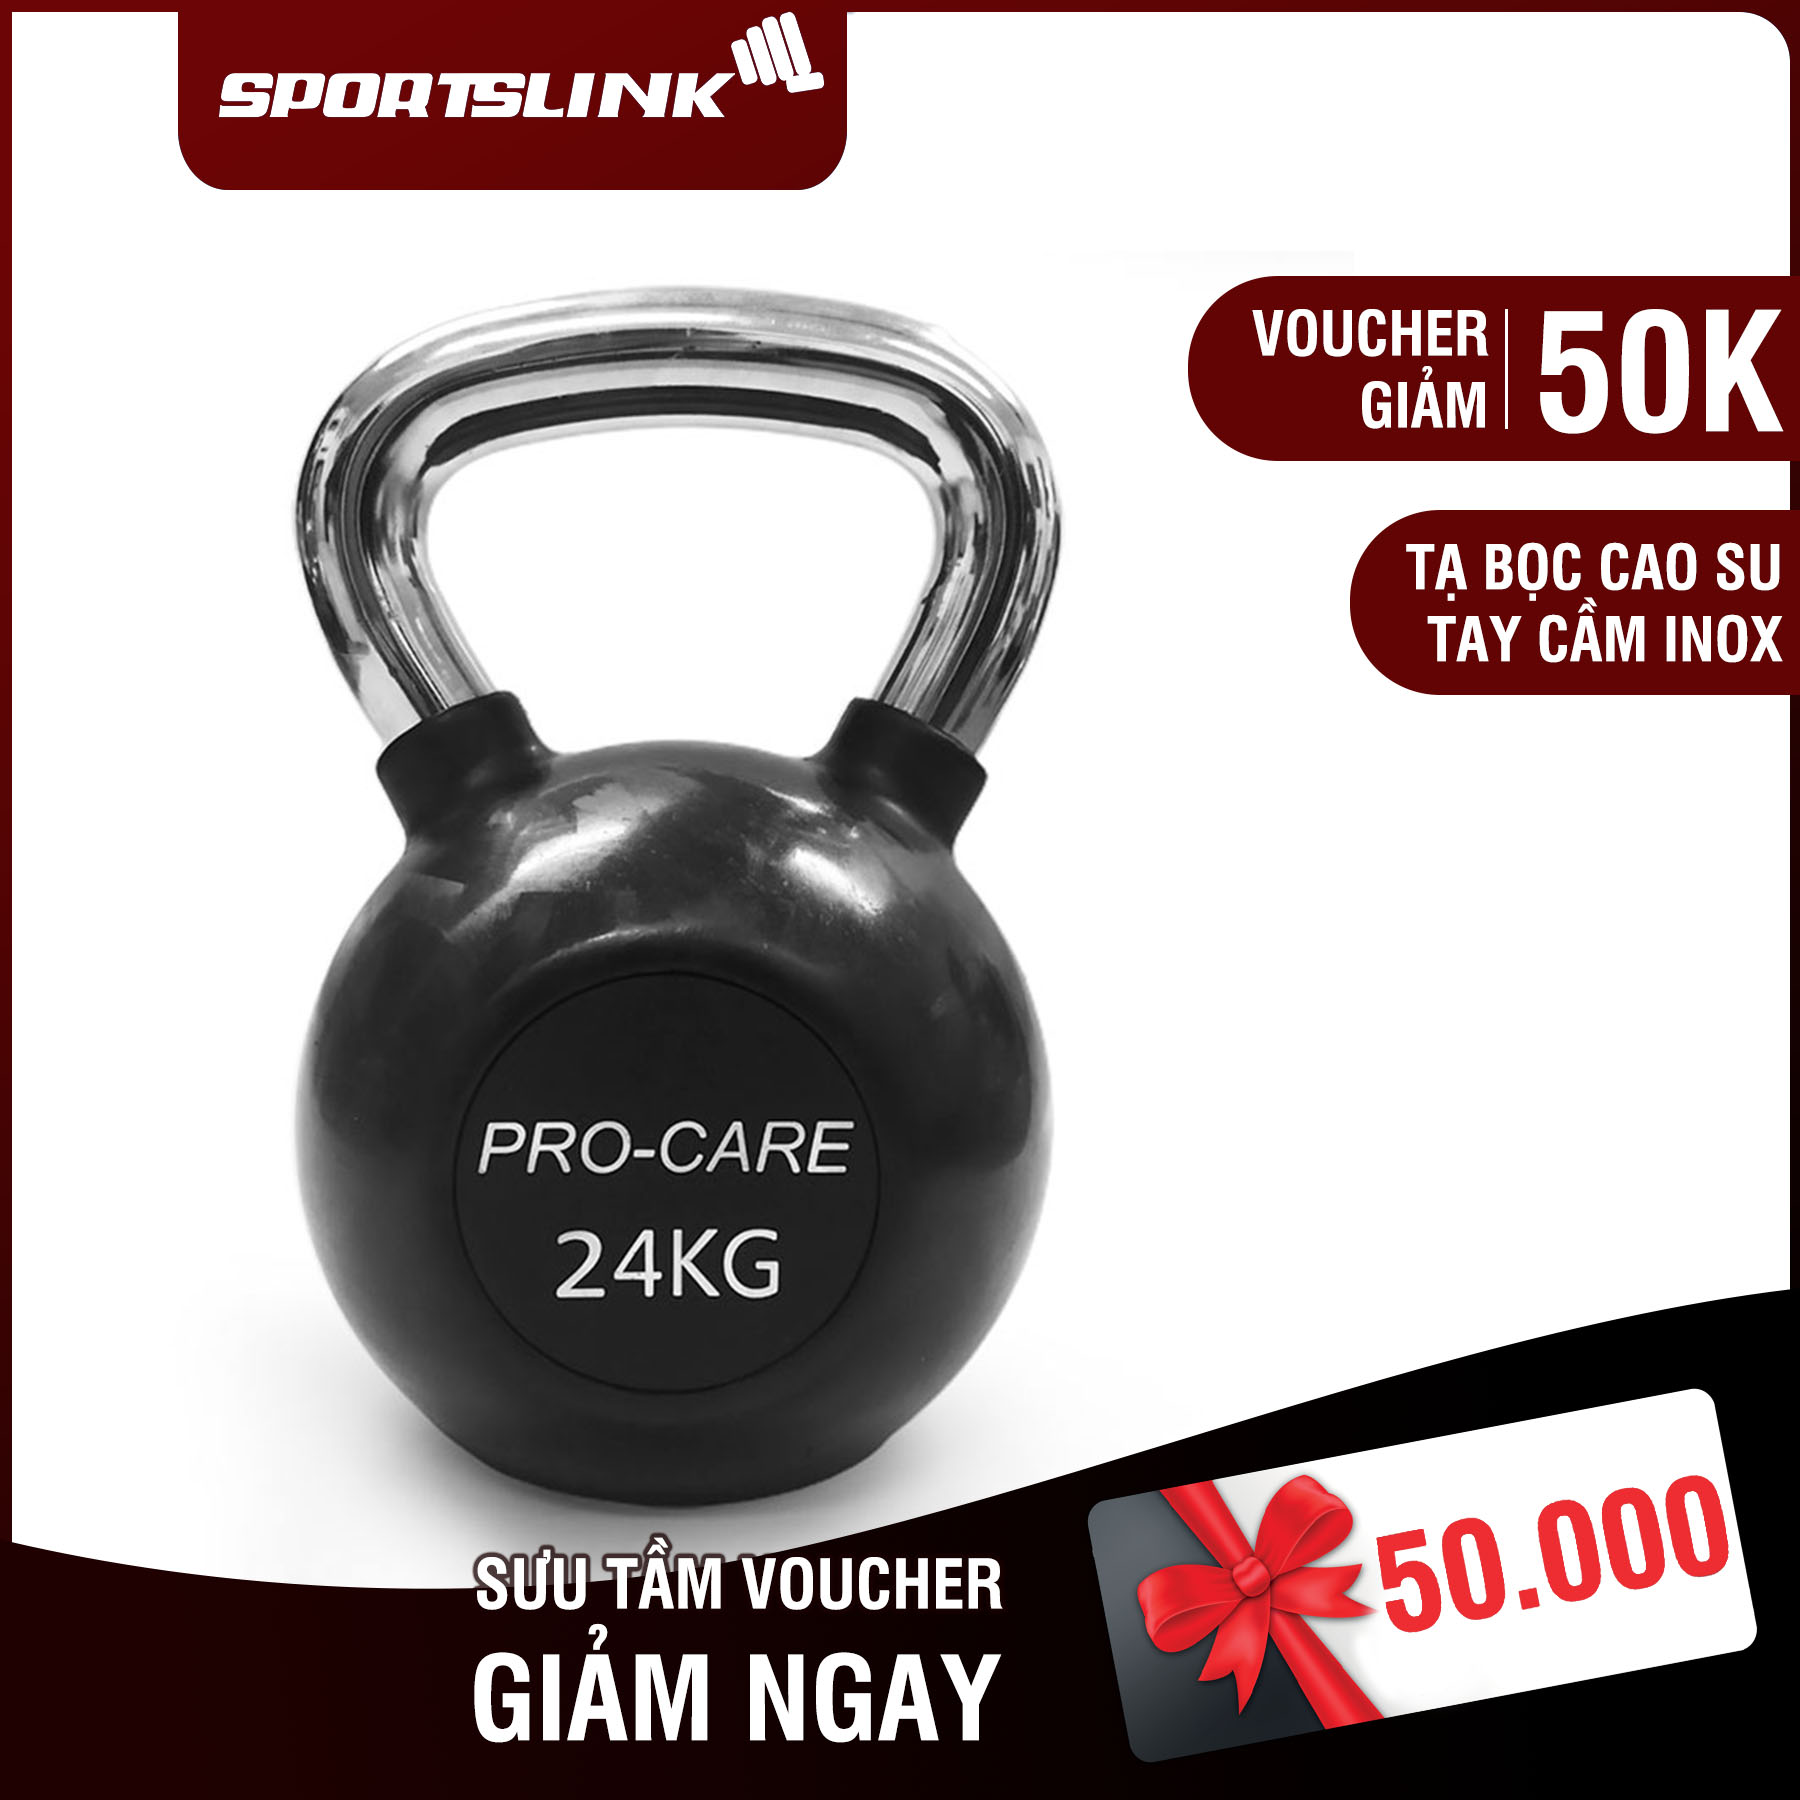 Procare 24kg Black Rubber Kettlebell with Chrome Handle